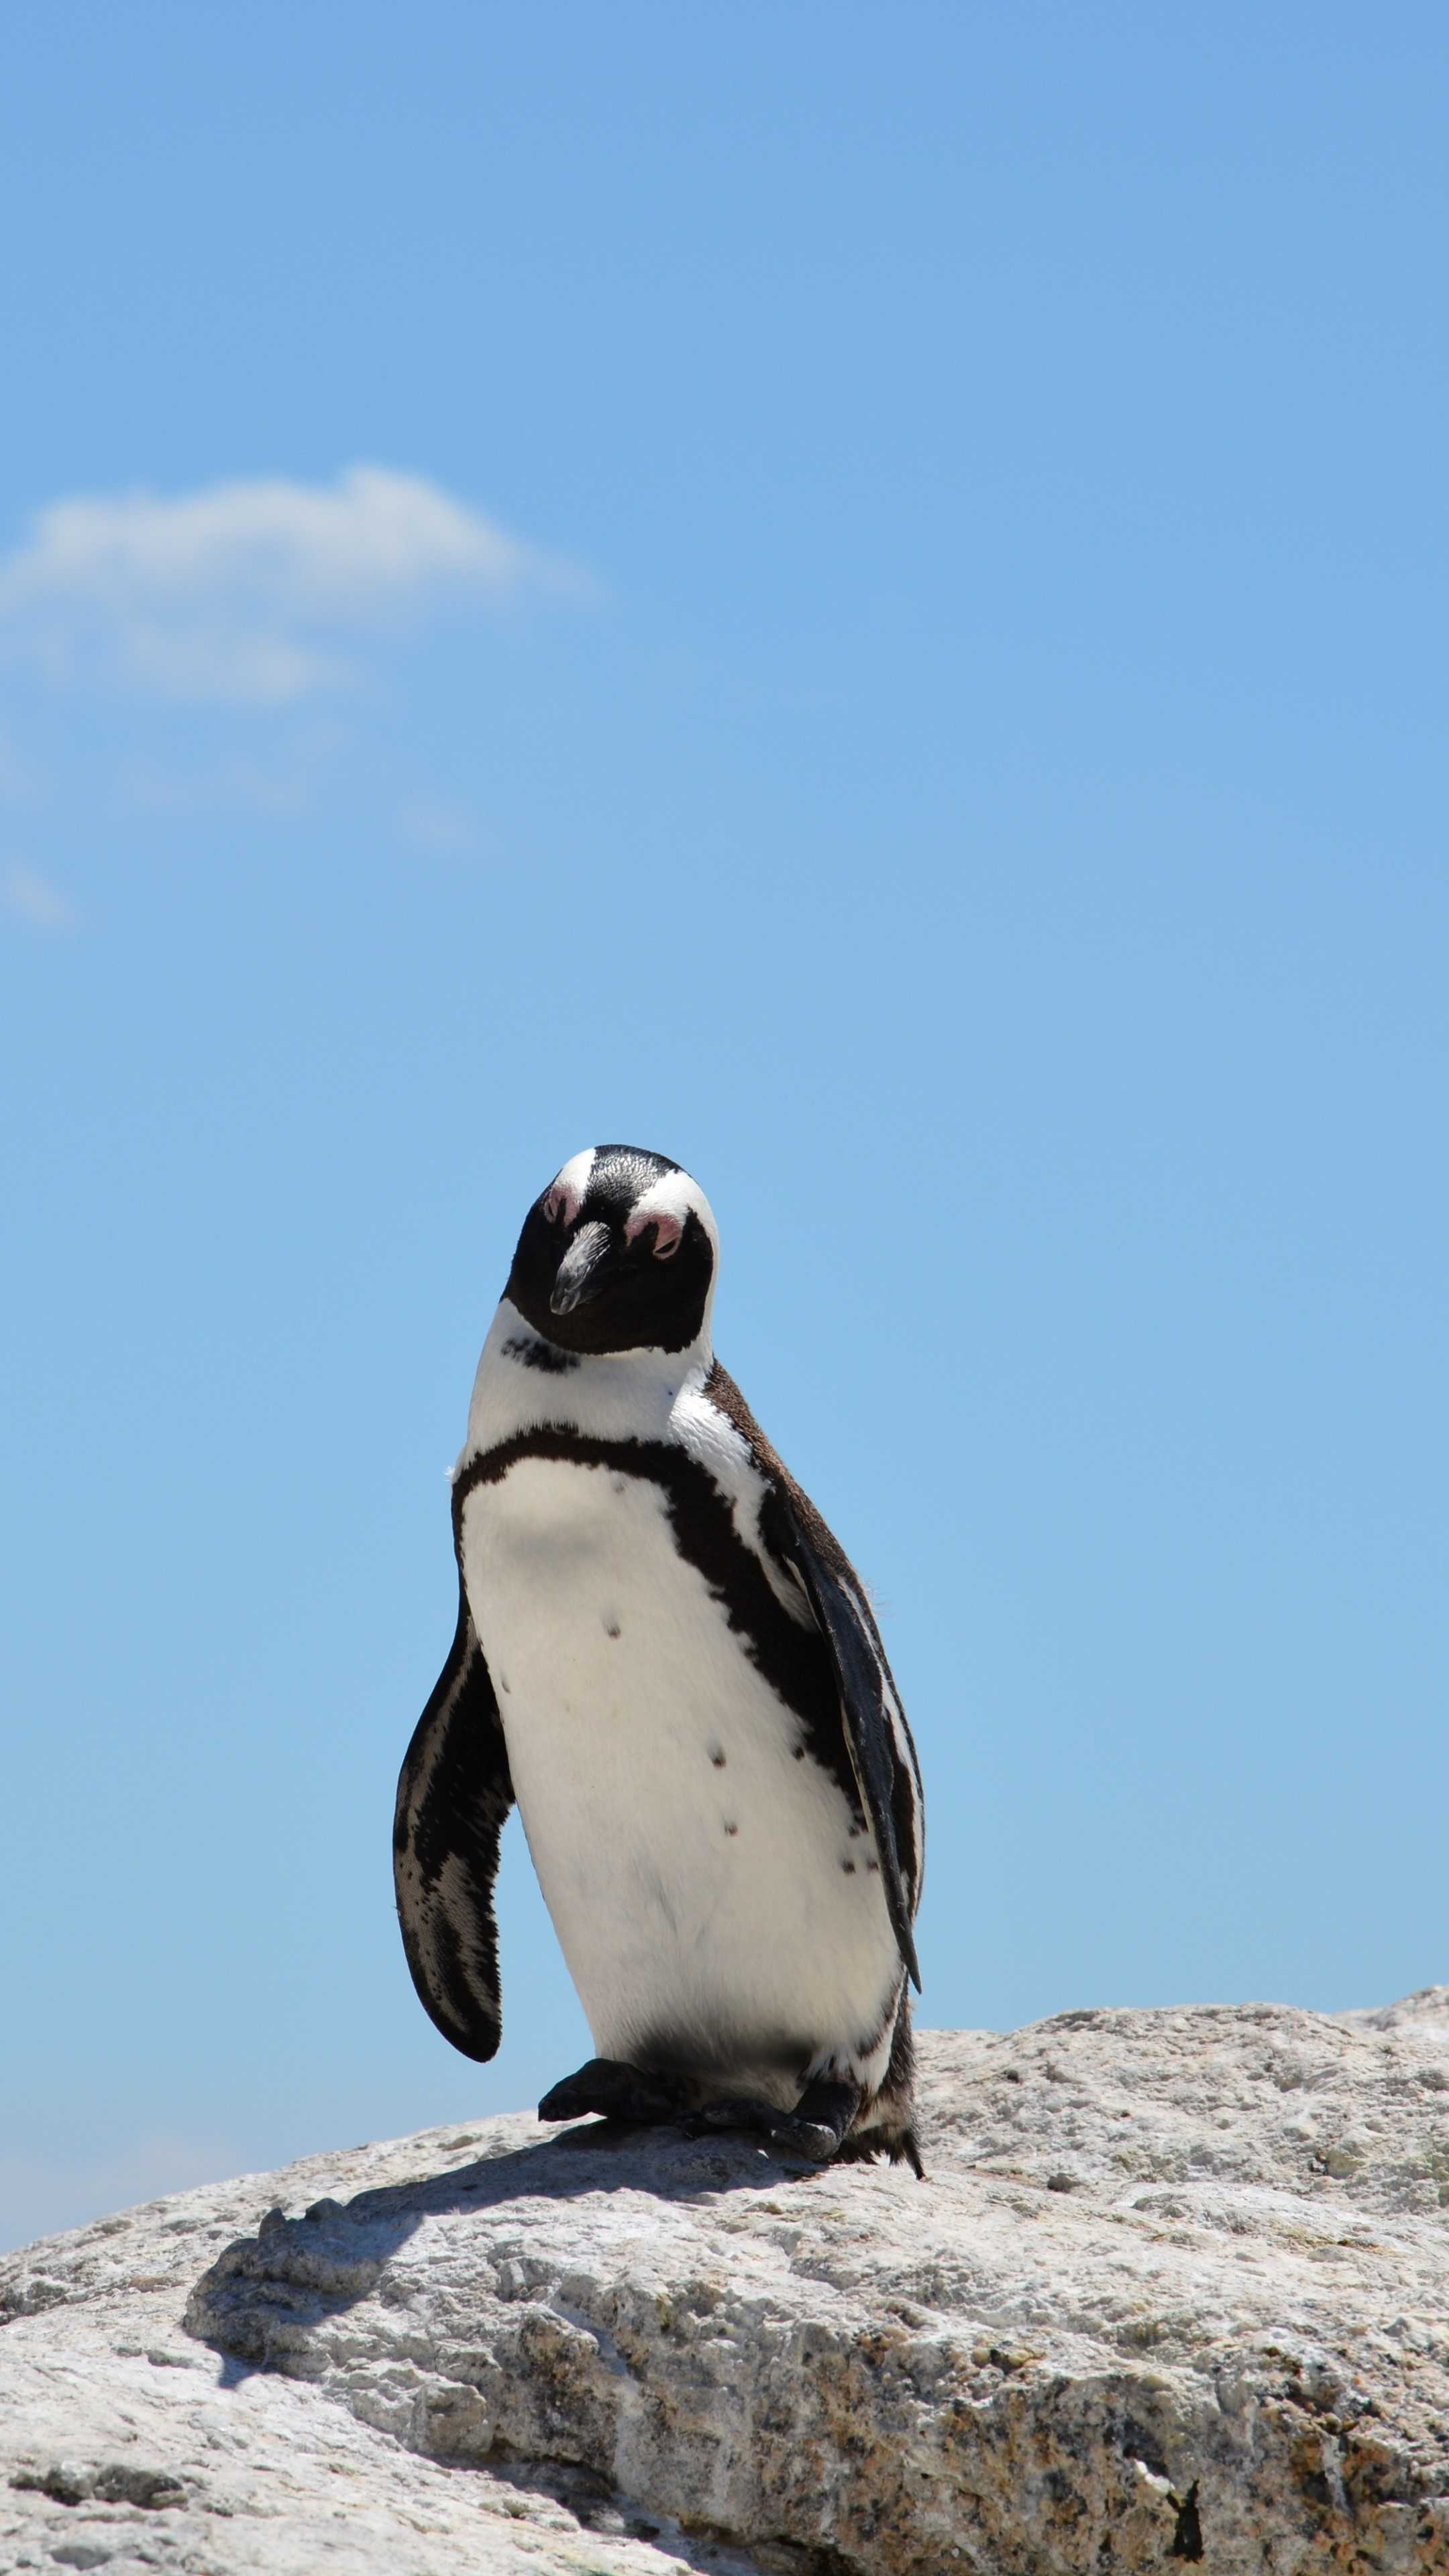 Varied penguin wallpapers, Diverse collection, 94 options, Penguin variety, 2160x3840 4K Phone